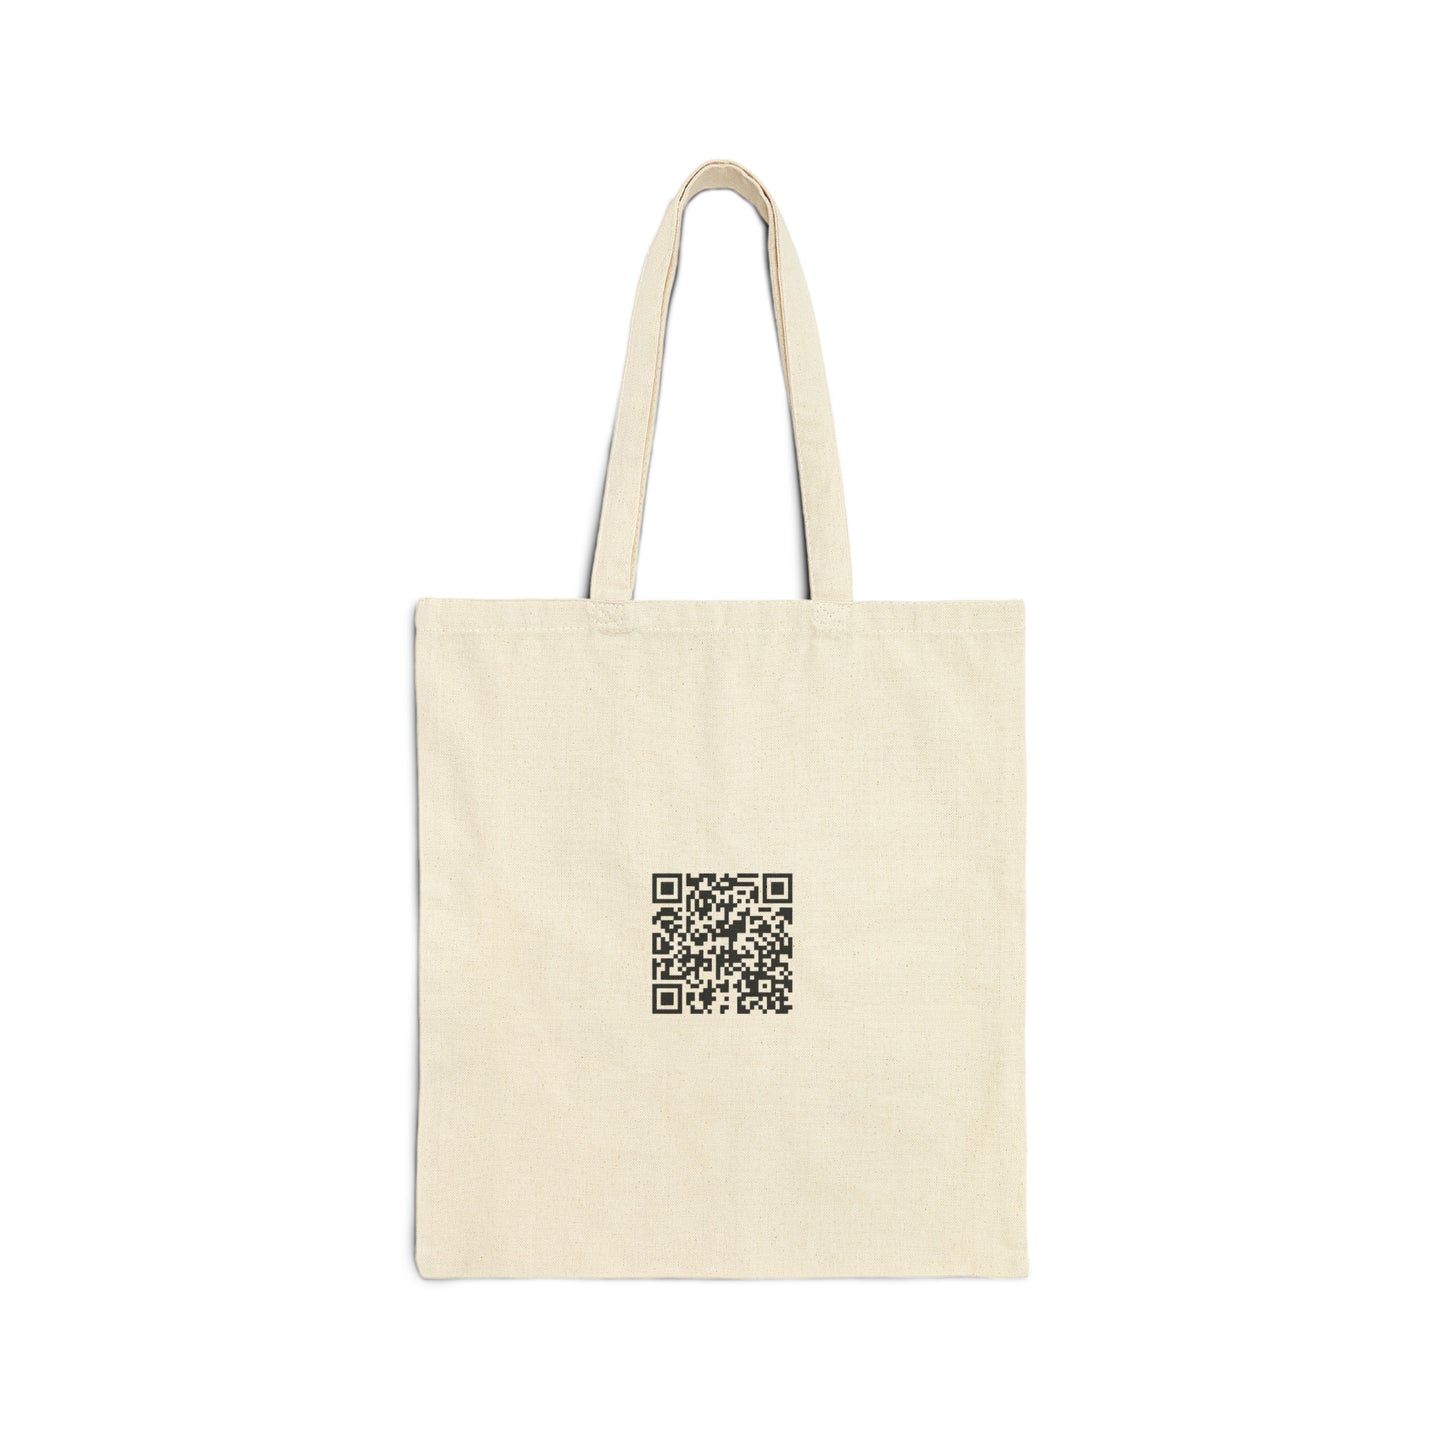 Tell Me Why - Cotton Canvas Tote Bag